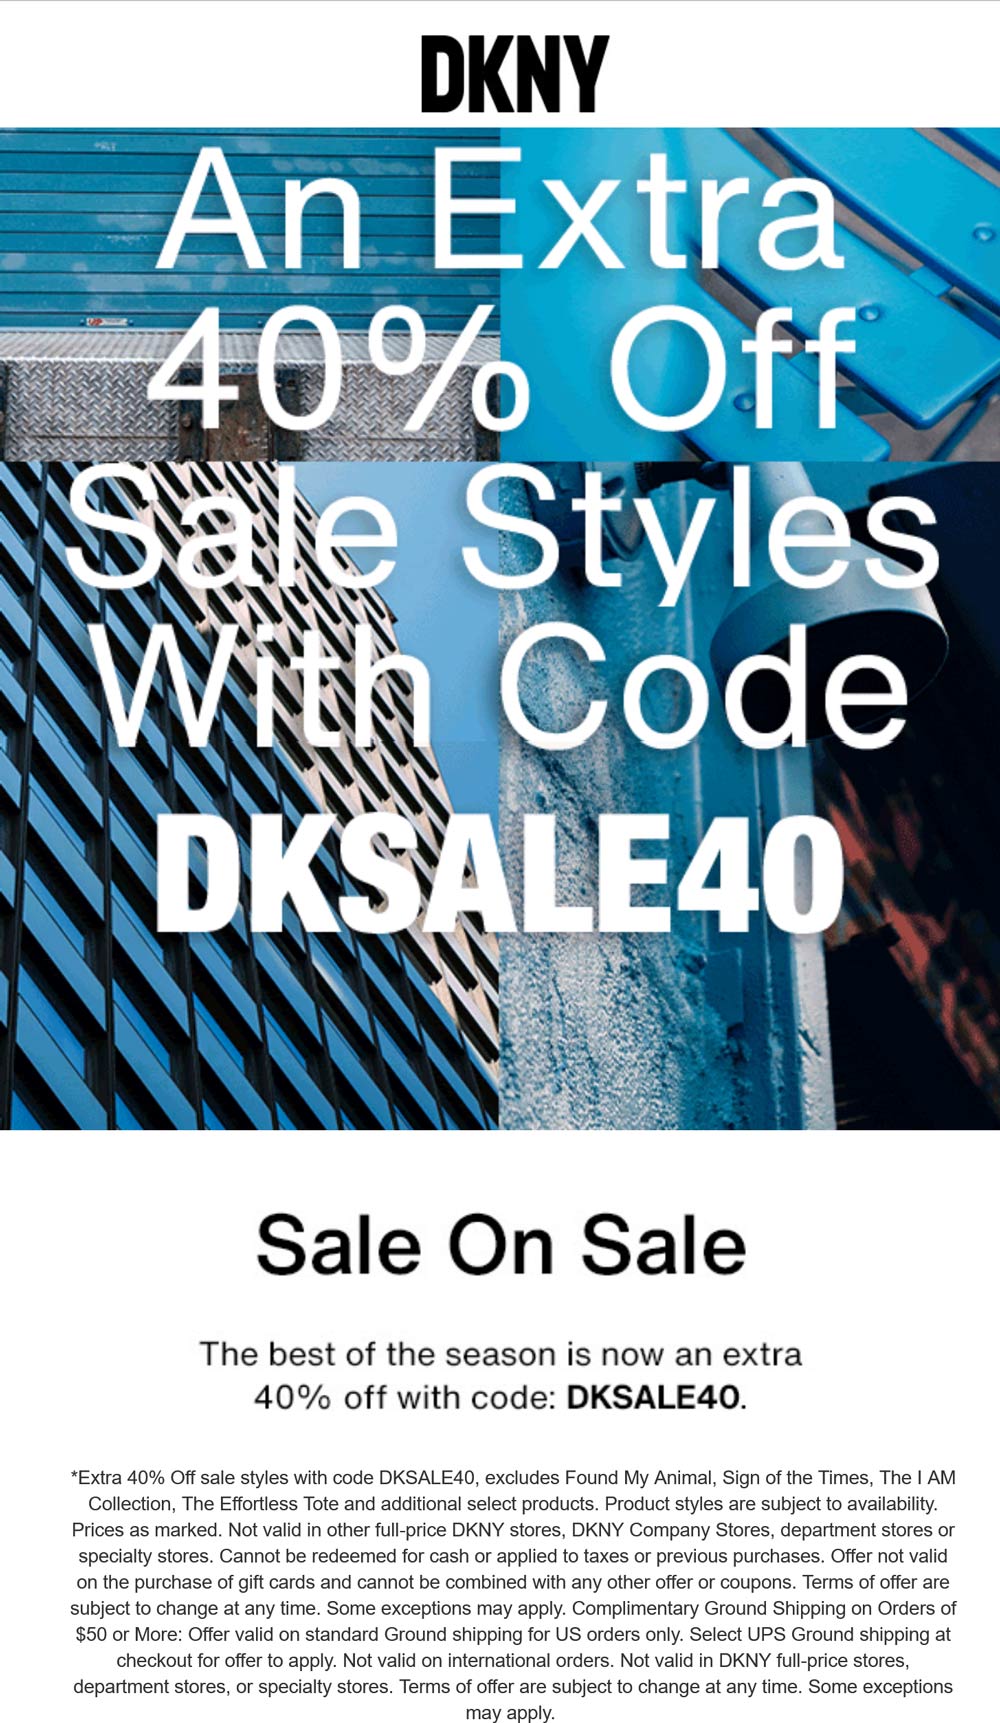 DKNY stores Coupon  Extra 40% off sale styles online at DKNY via promo code DKSALE40 #dkny 